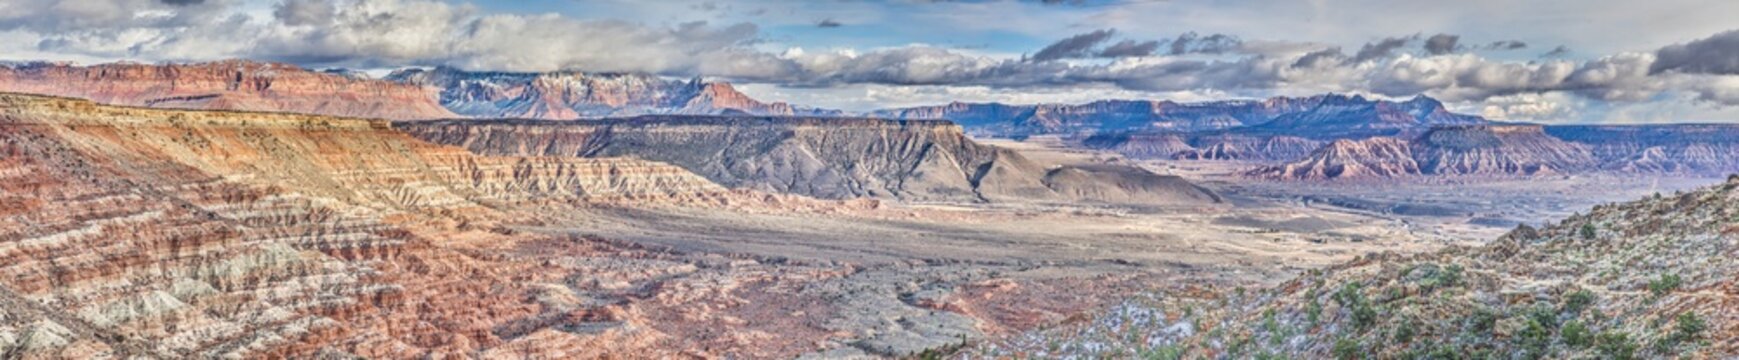 High-contrast panoramic image of the canyon landscape of the Arizona desert